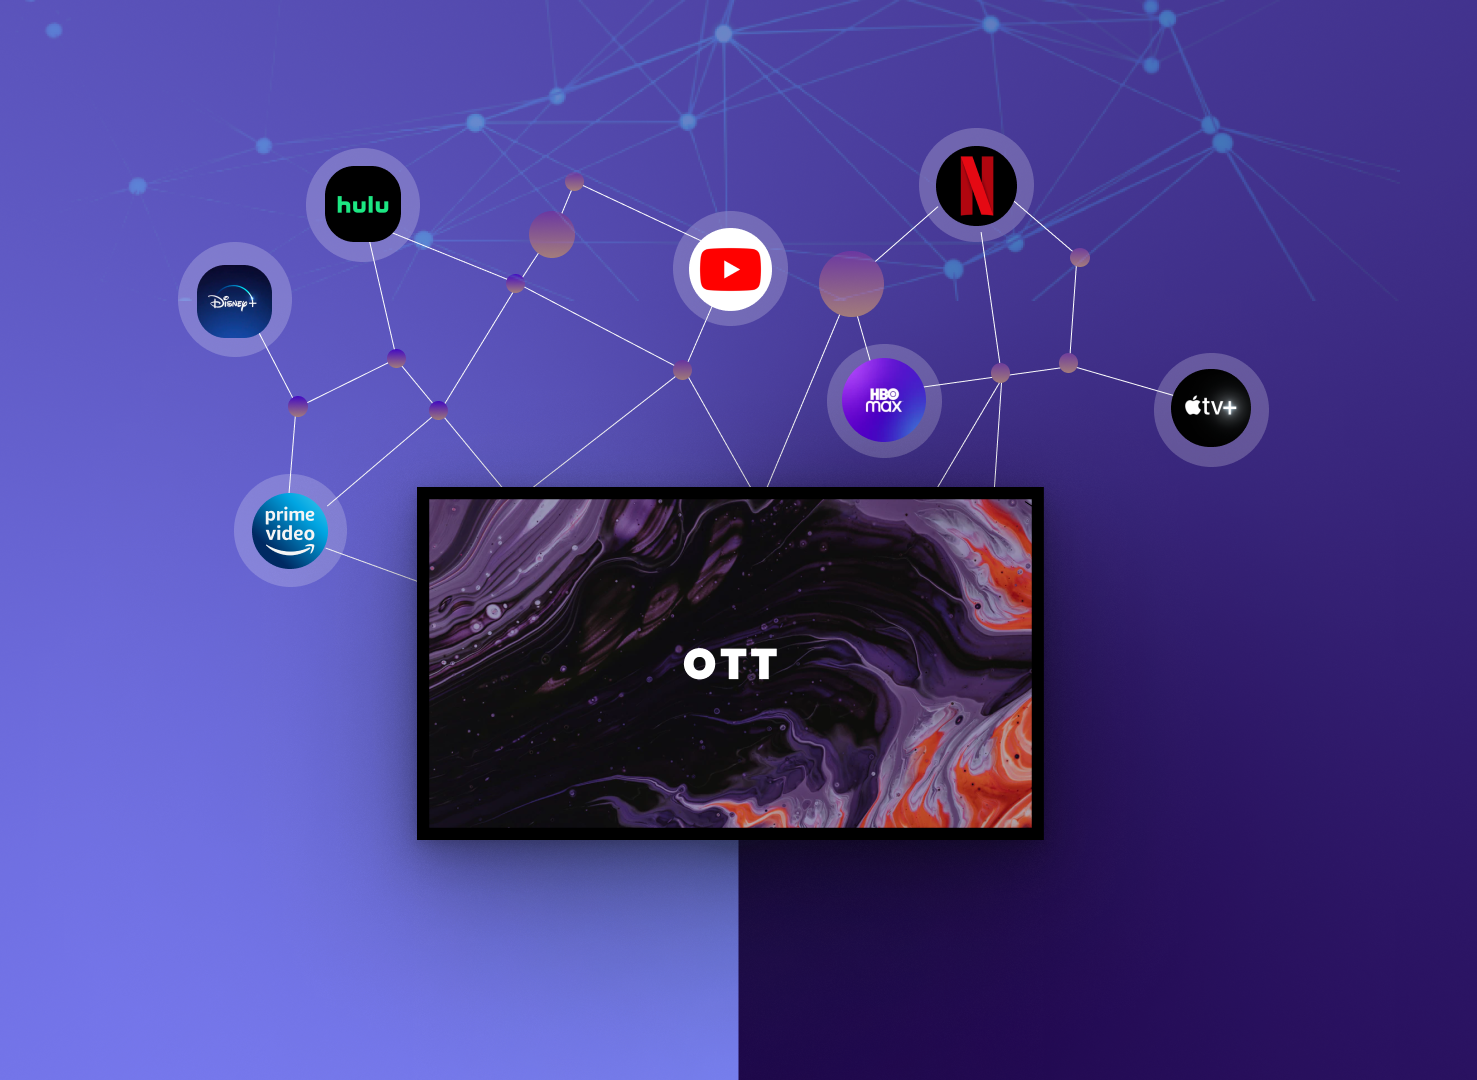 How the OTT platform can be benefited from Blockchain technology?